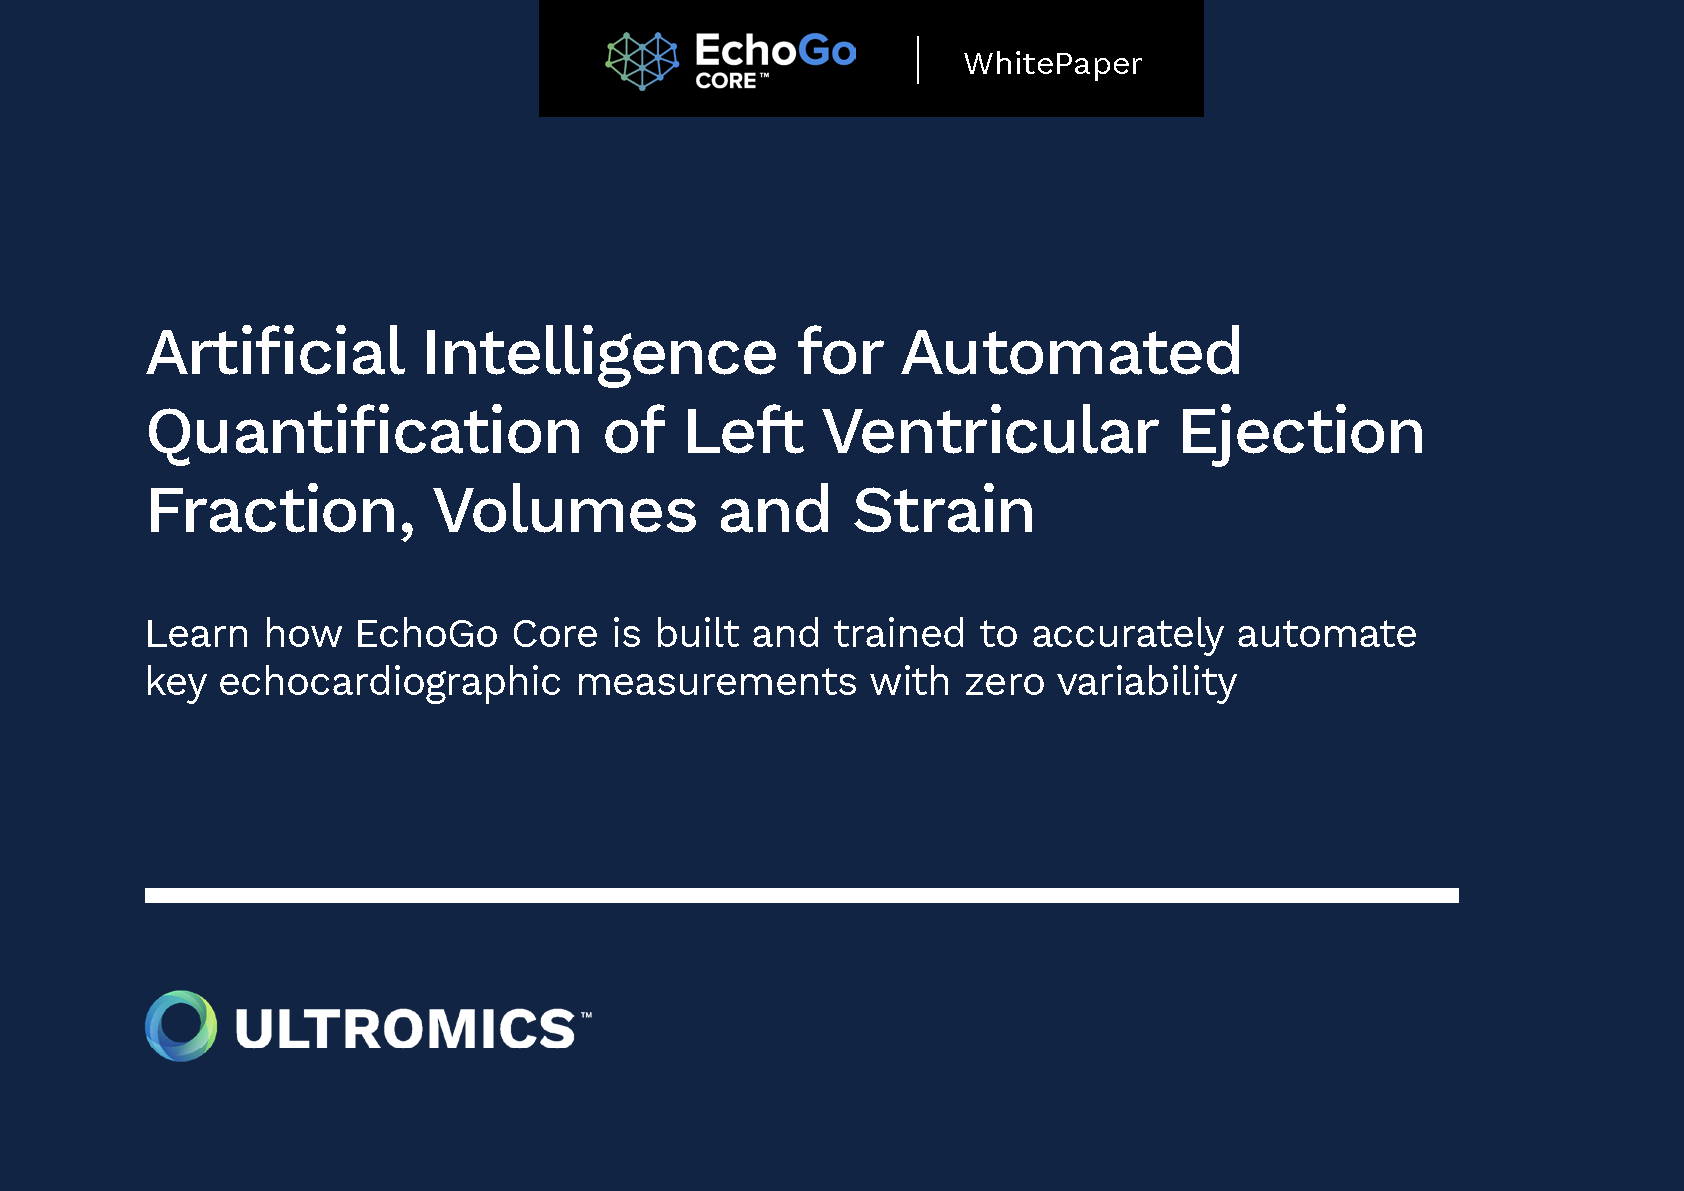 EchoGo Core 1.5 WhitePaper - Artificial Intelligence for Automated Quantification of Left Ventricular Ejection Fraction, Volumes and Strain_Page-cover